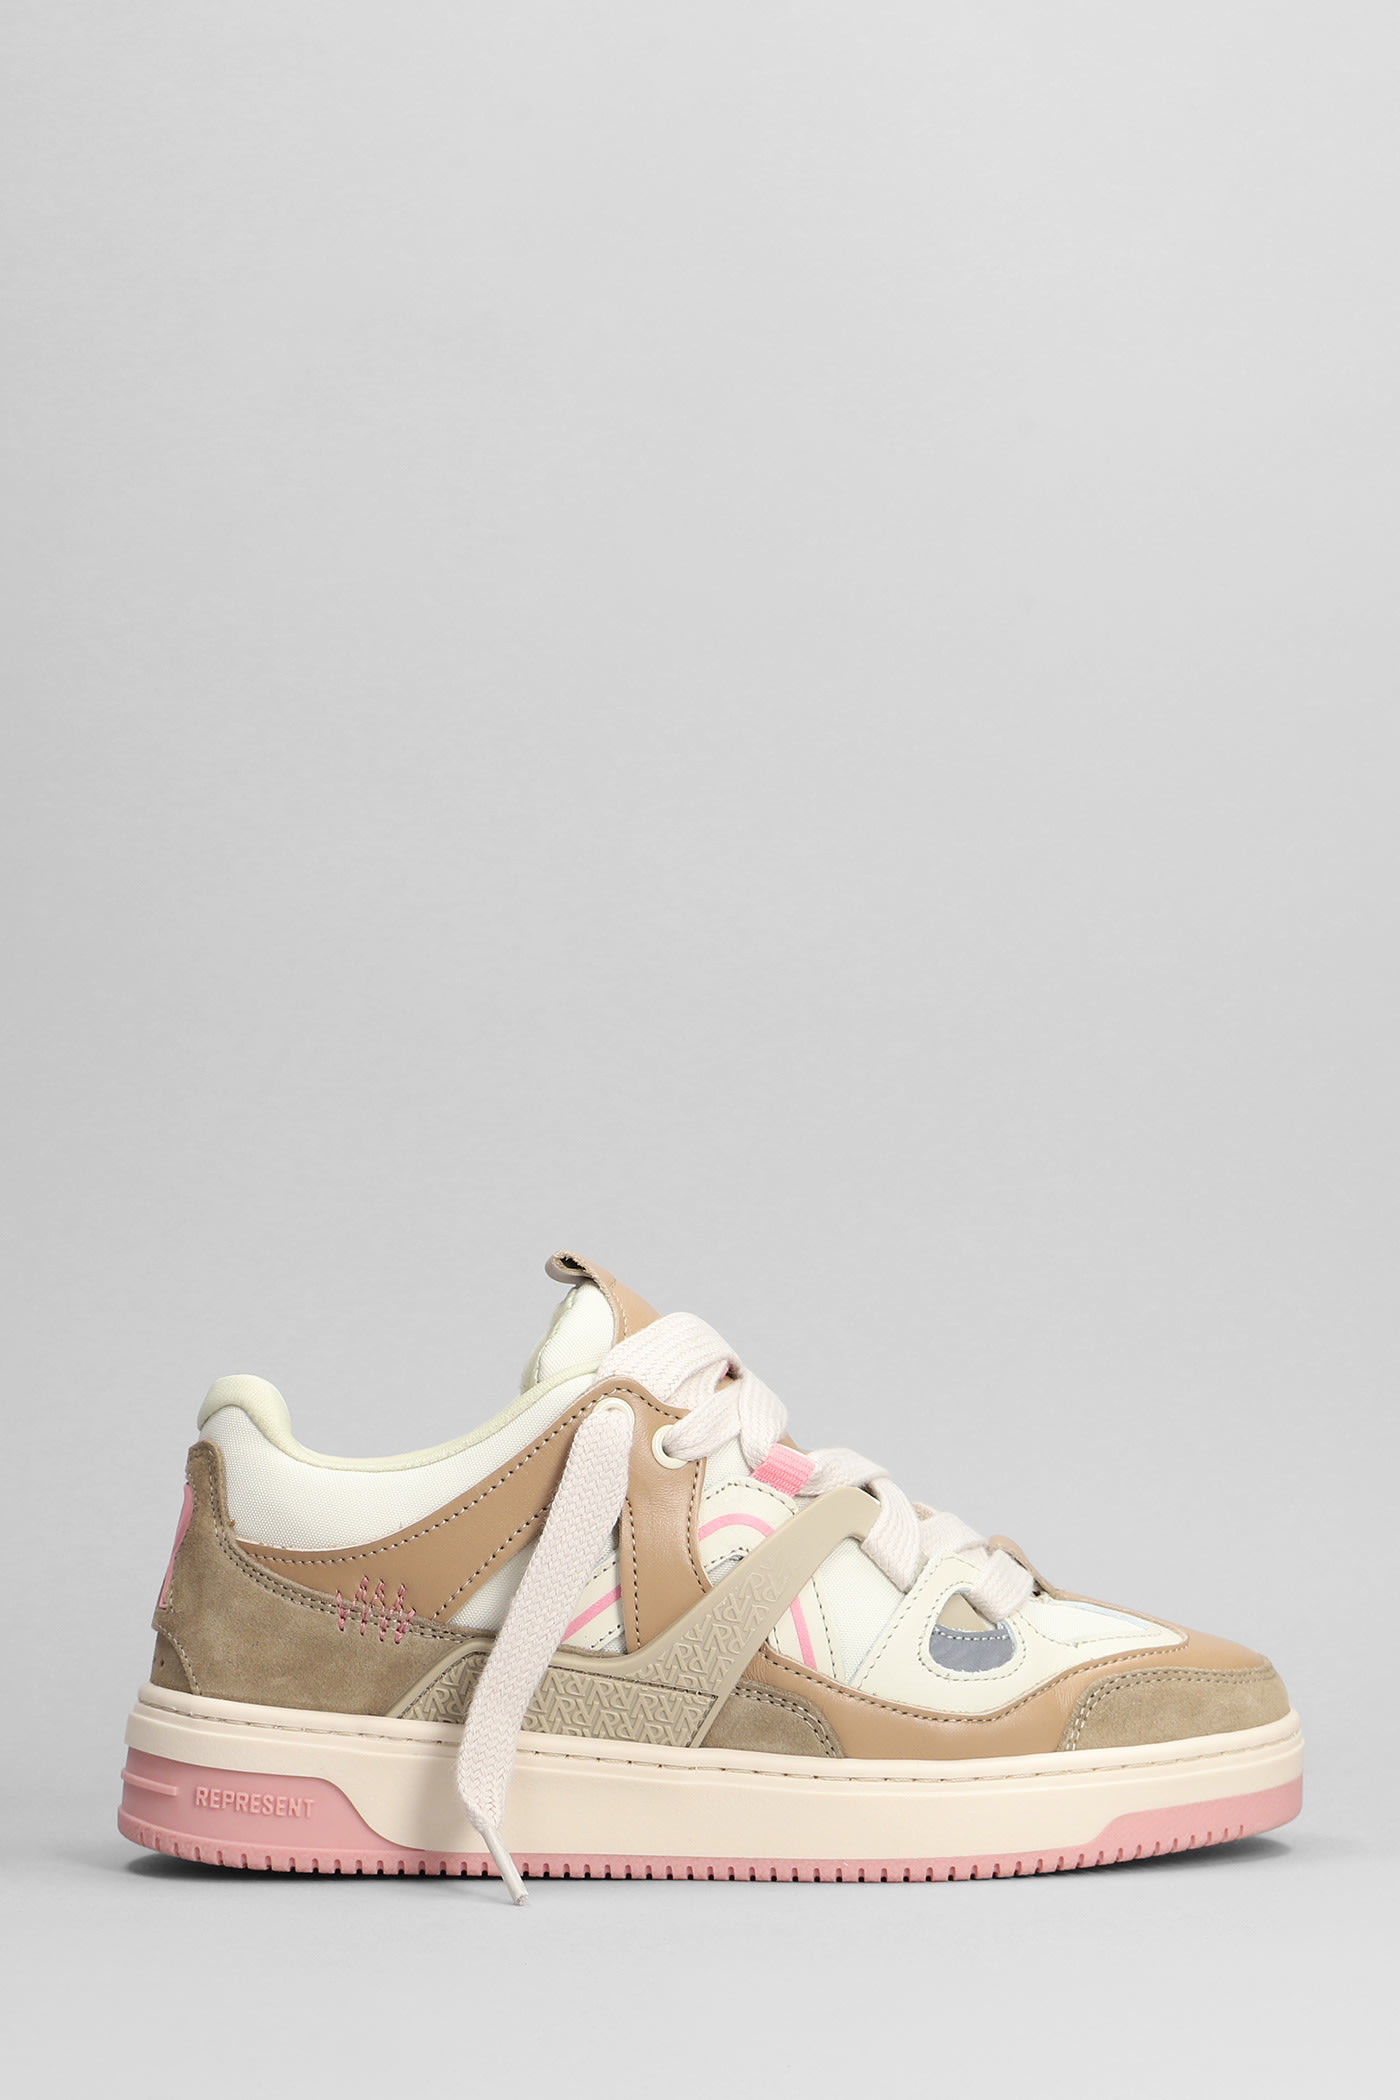 Represent Bully Sneakers In Beige Suede And Leather